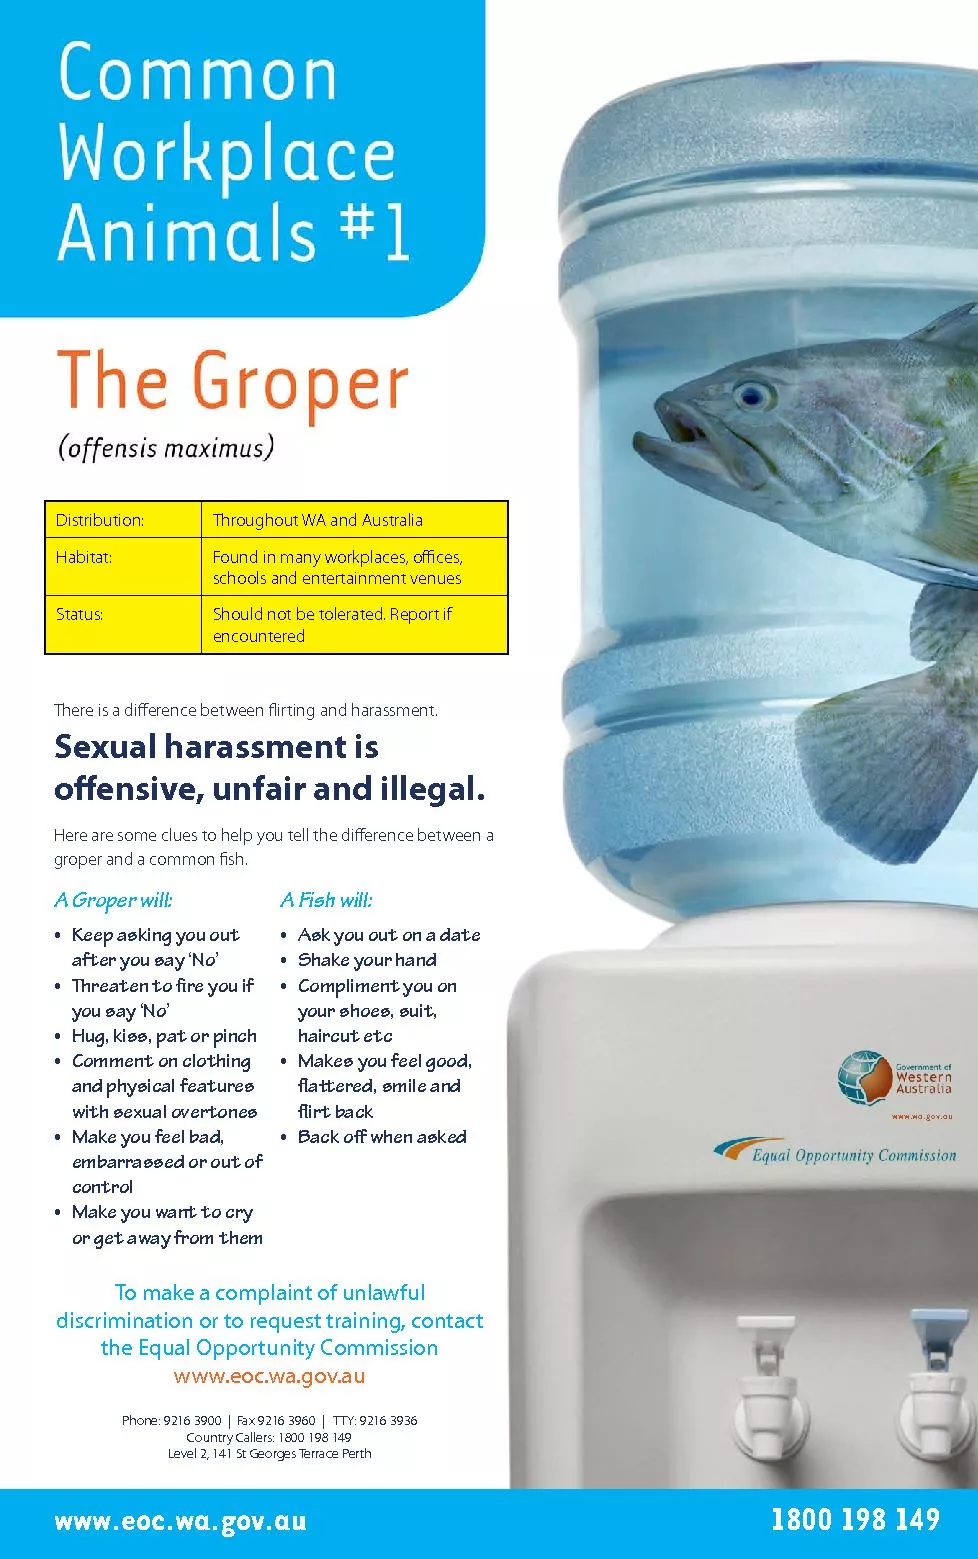 A Groper will:Keep asking you out after you say ‘No’Threaten